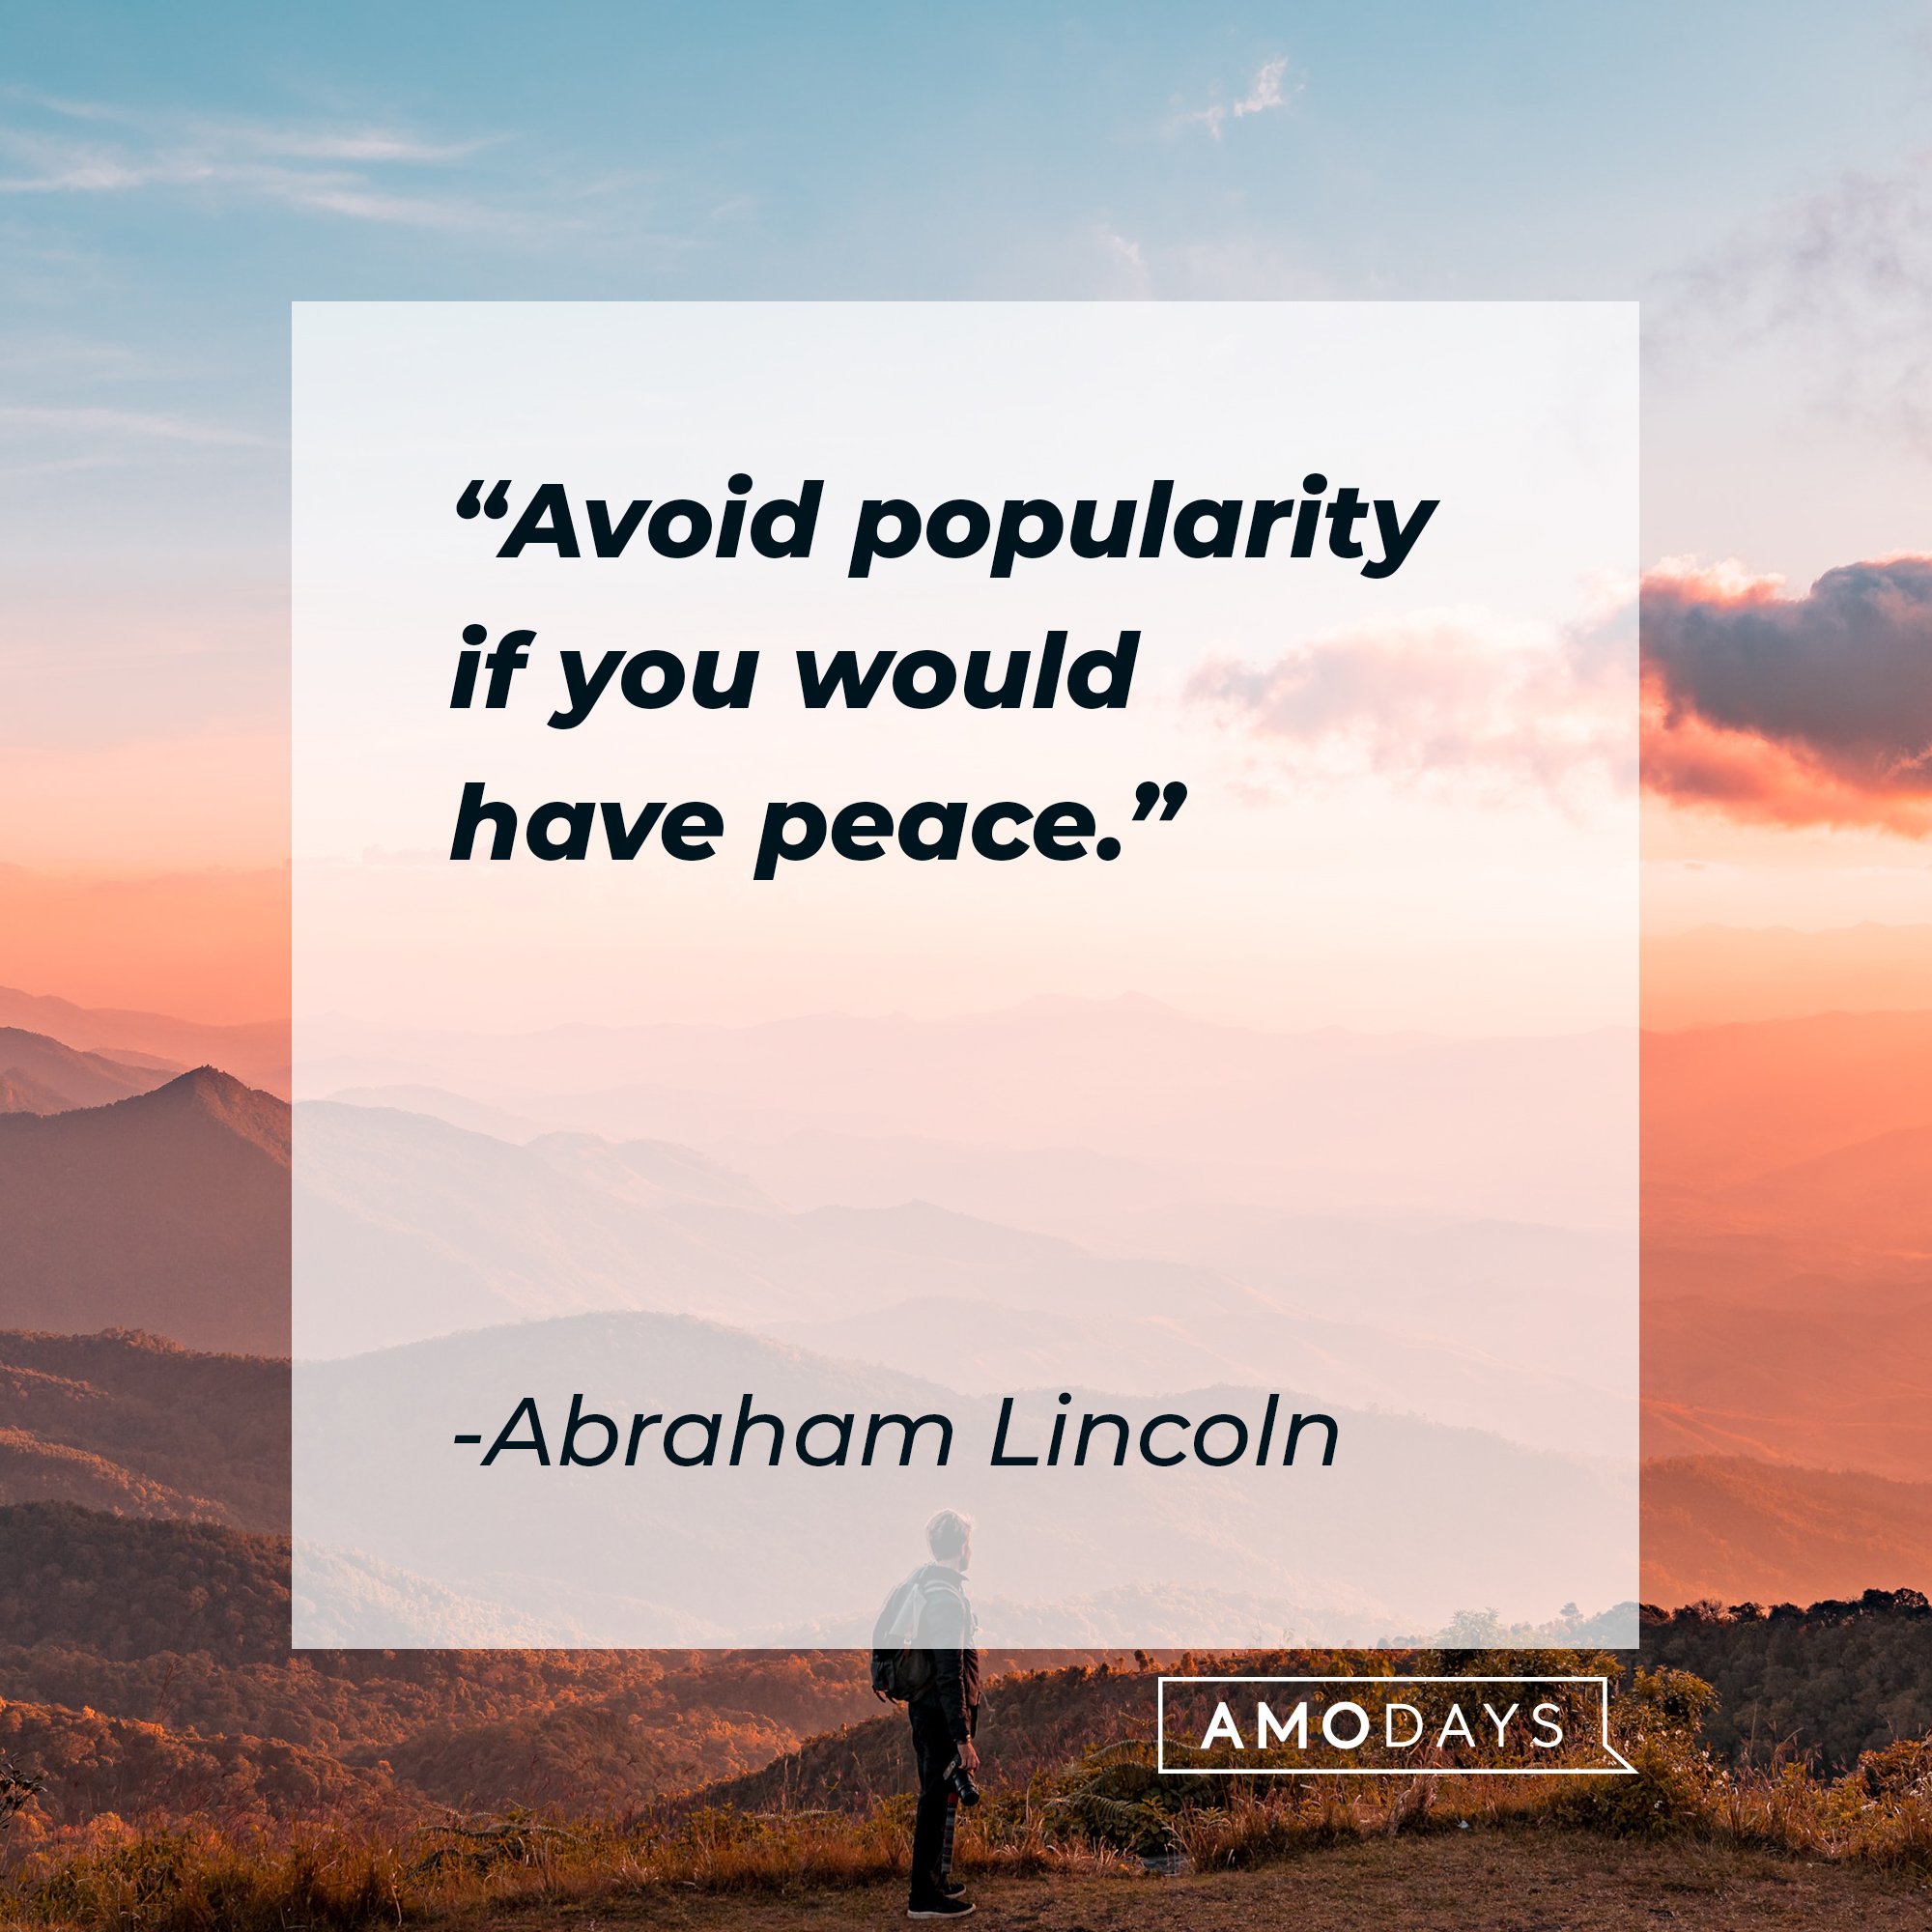 Abraham Lincoln’s quote: "Avoid popularity if you would have peace." | Image: AmoDays